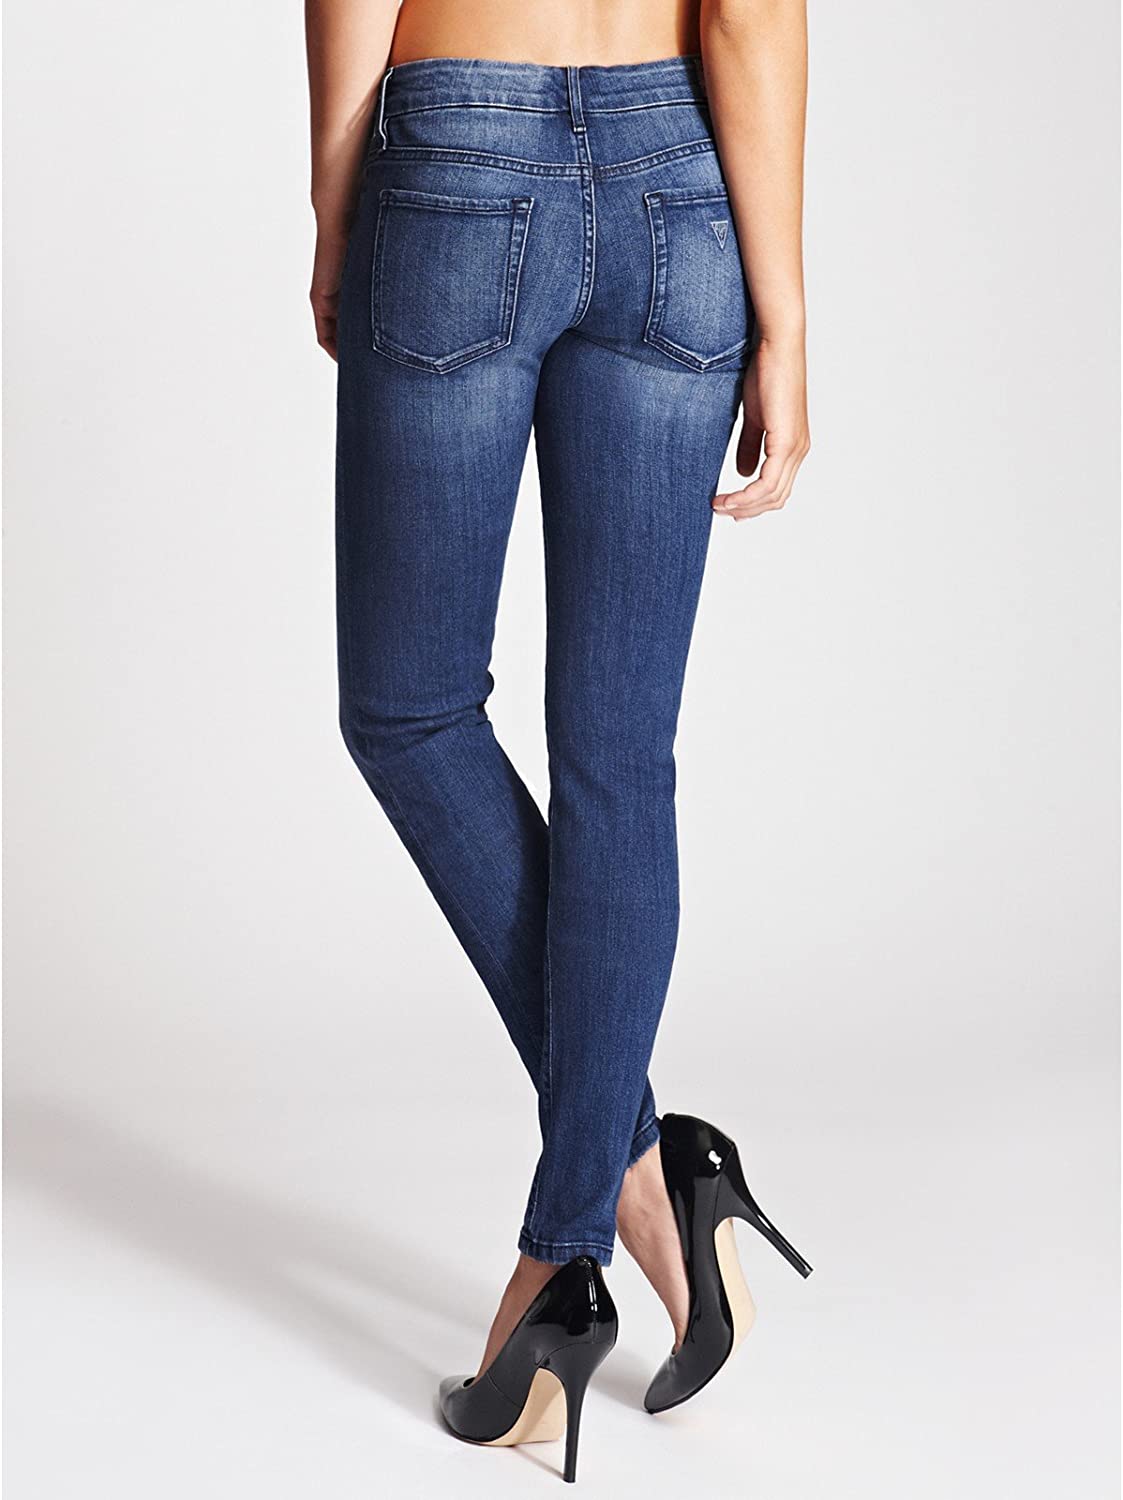 GUESS Sophia Mid-Rise Skinny Jeans